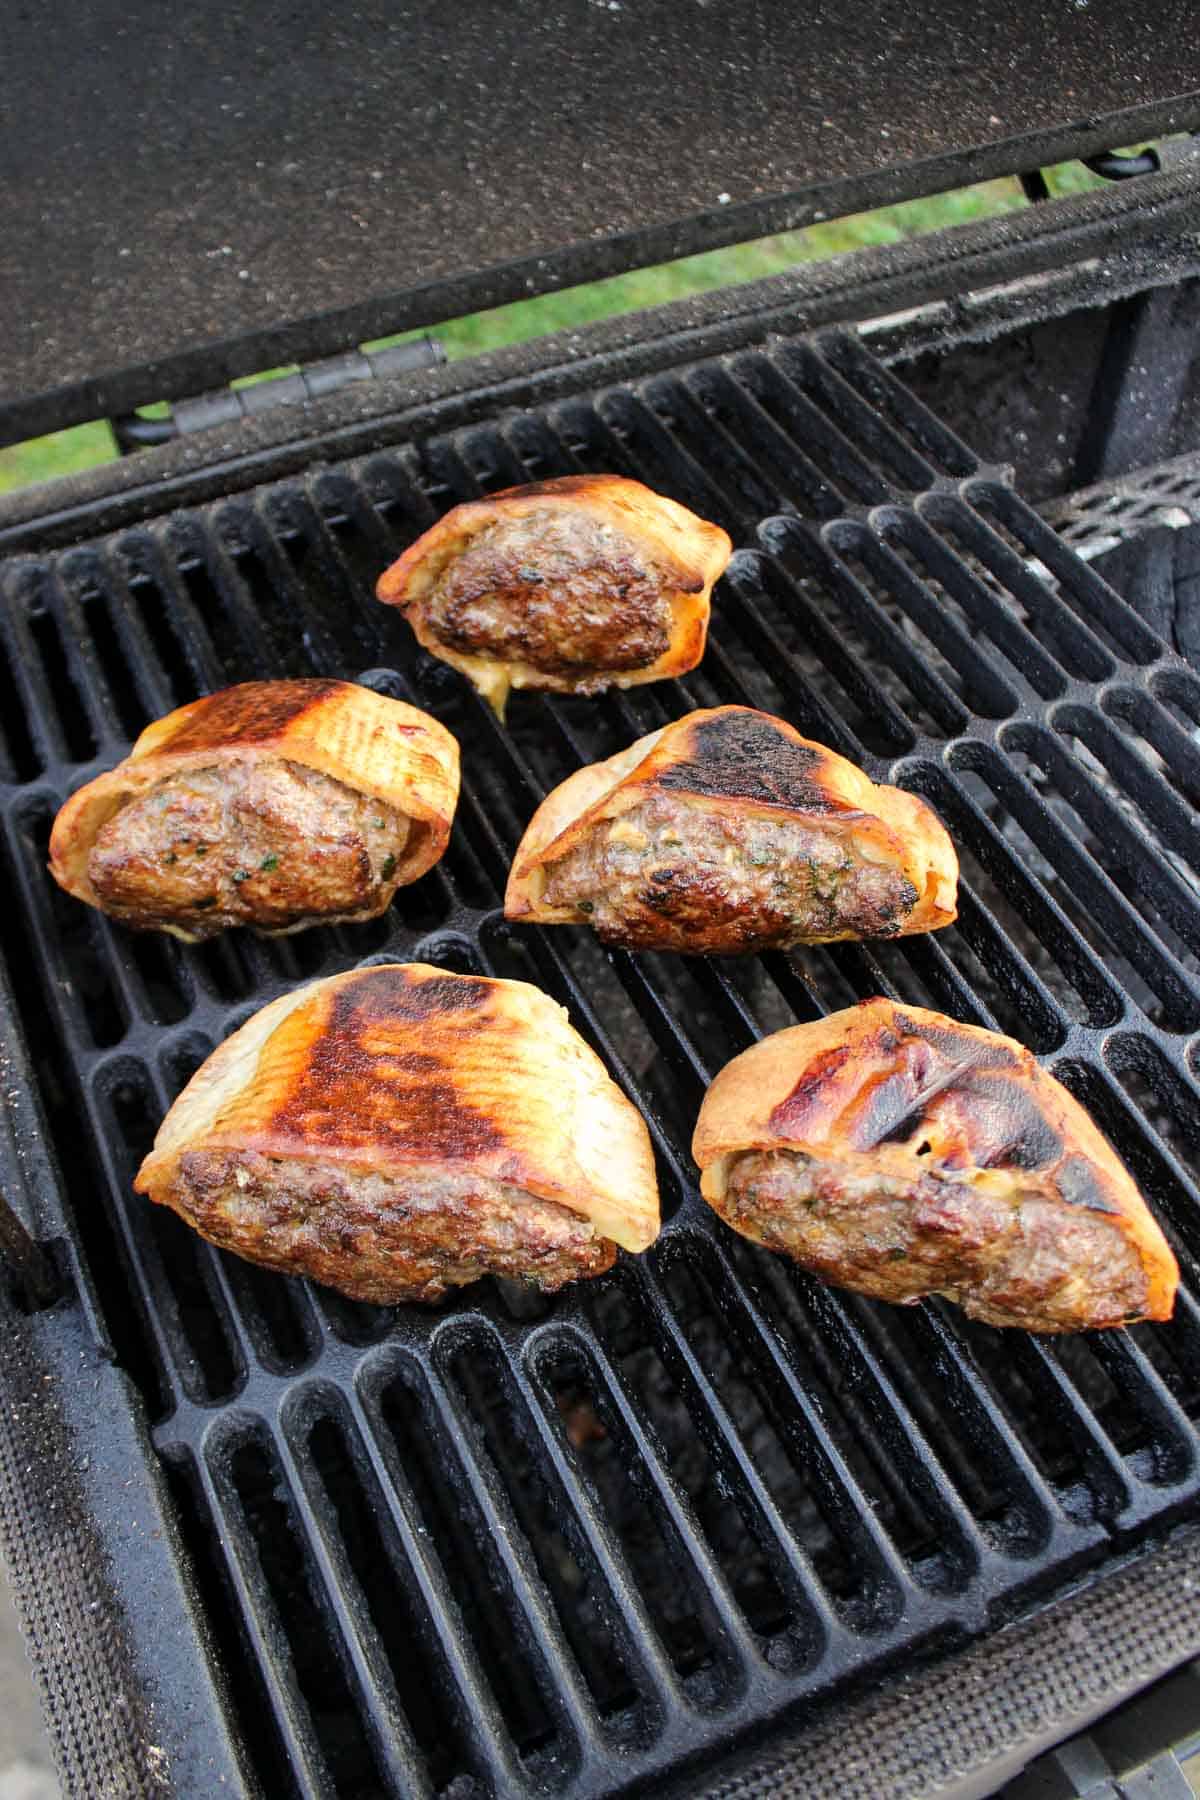 The pita pockets set on the side of the grill so they can cook indirectly.